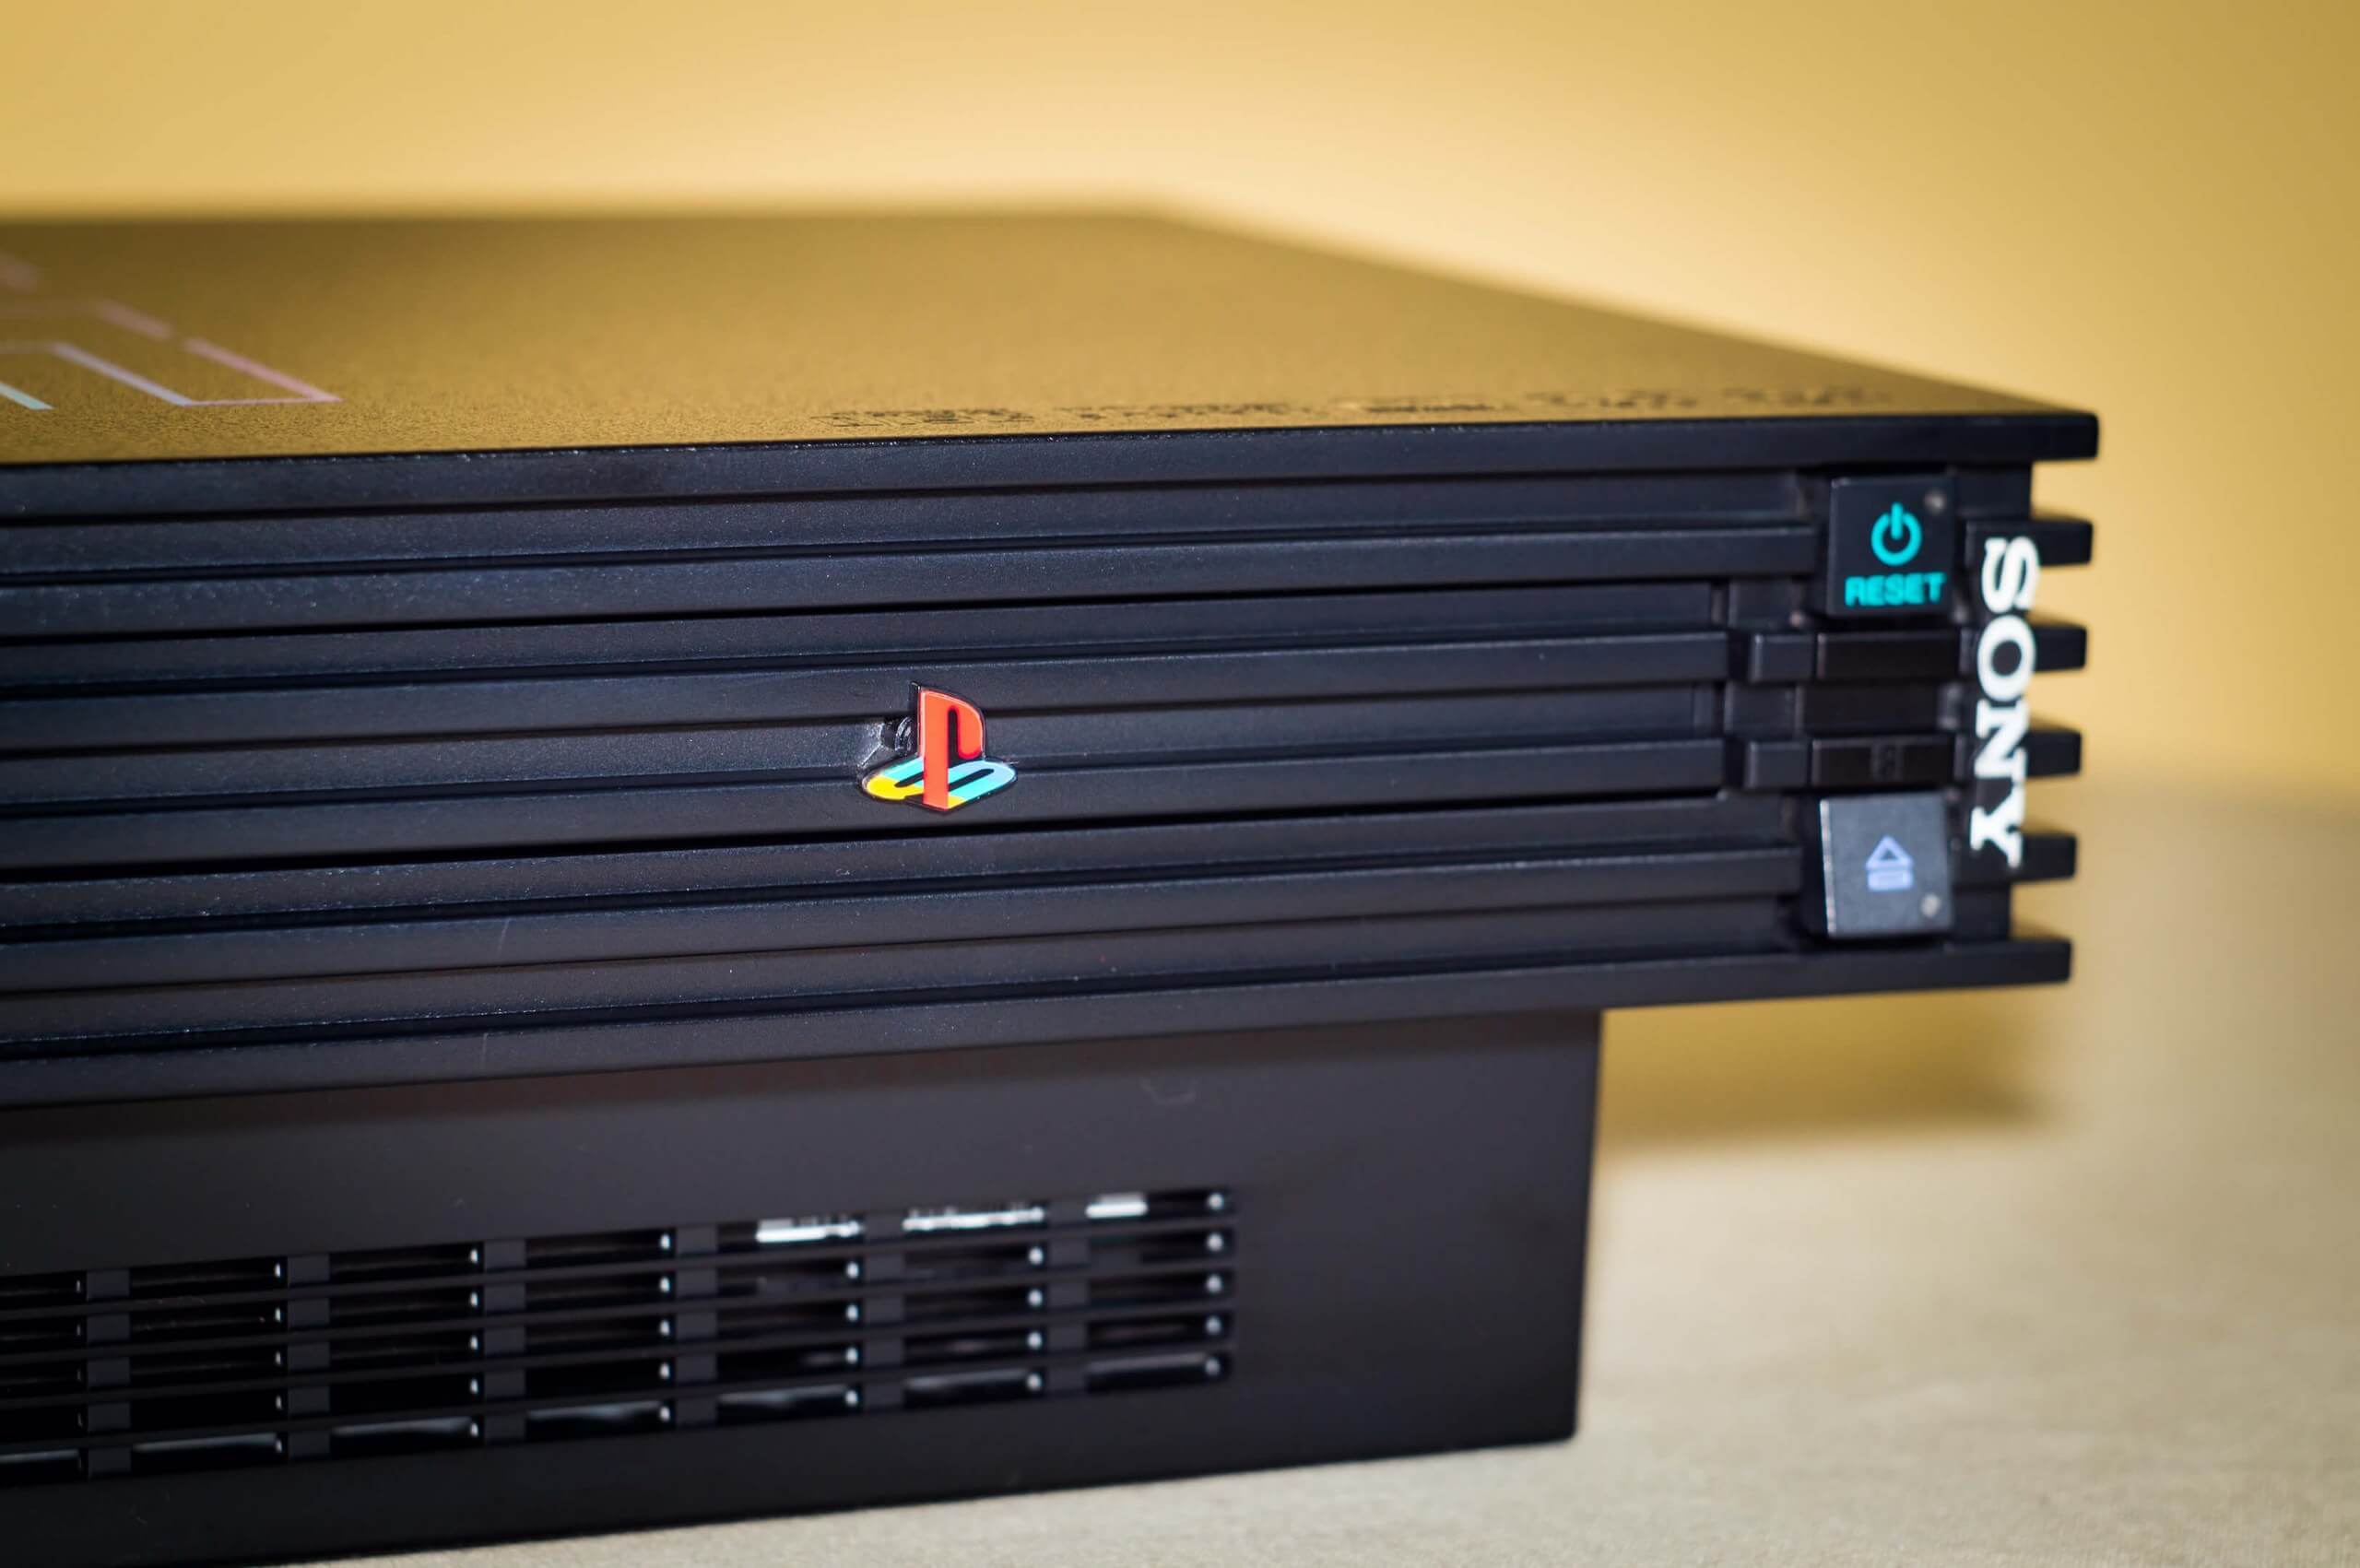 PS2 optical drive exploit makes homebrew games and backups playable without hardware mods